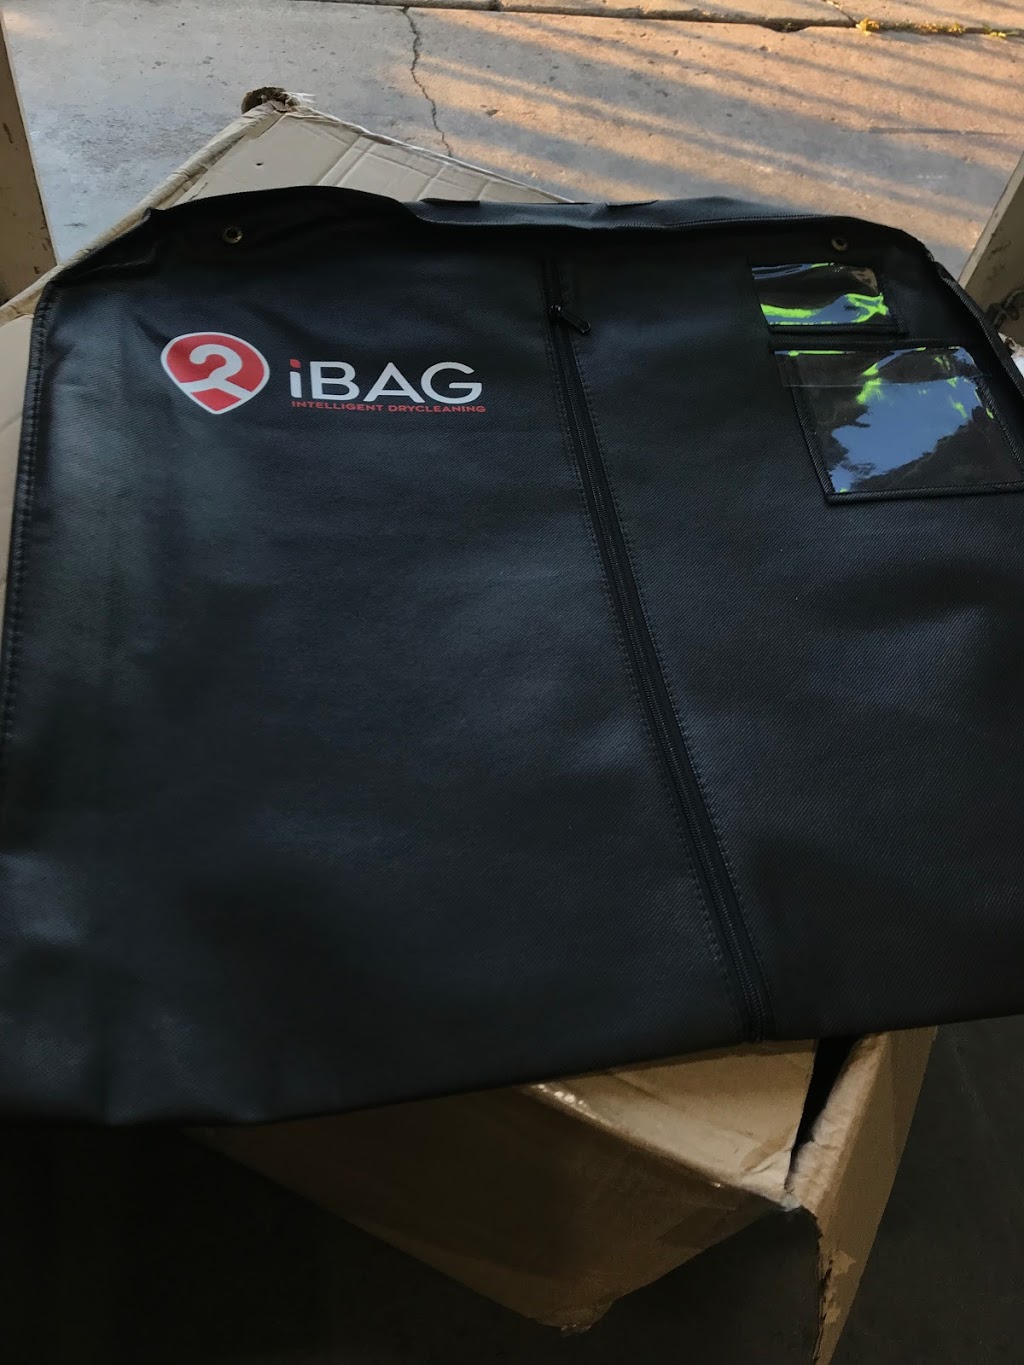 iBAG intelligent drycleaning | laundry | 457 Barkly St, West Footscray VIC 3012, Australia | 1300132320 OR +61 1300 132 320